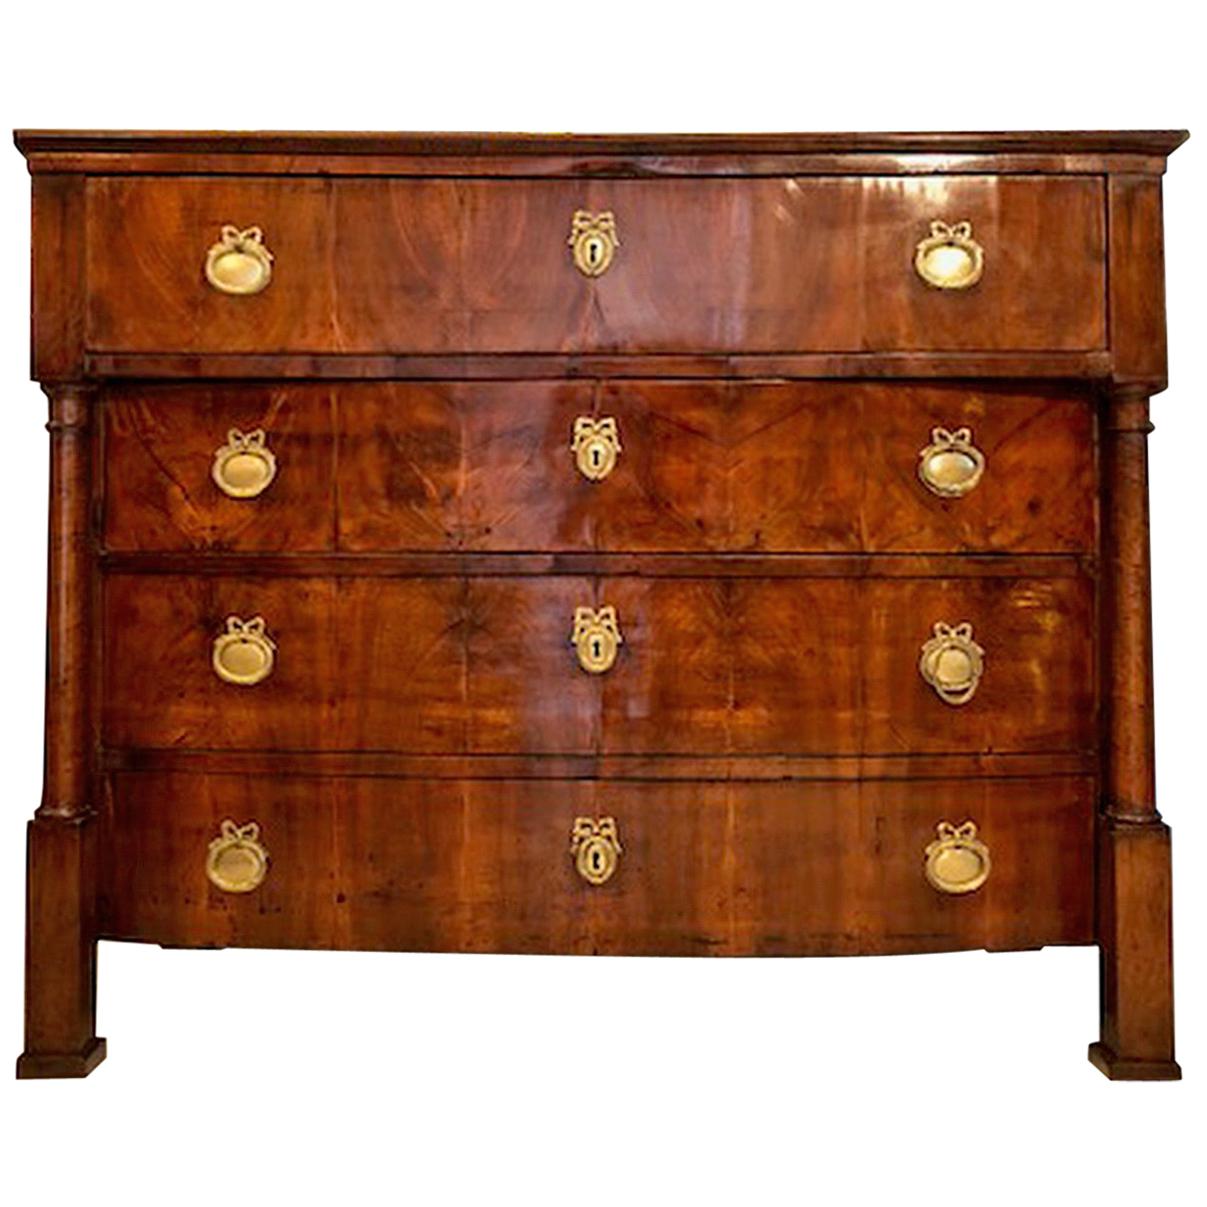 Restored Empire Commode Four-Drawer Chest Original For Sale